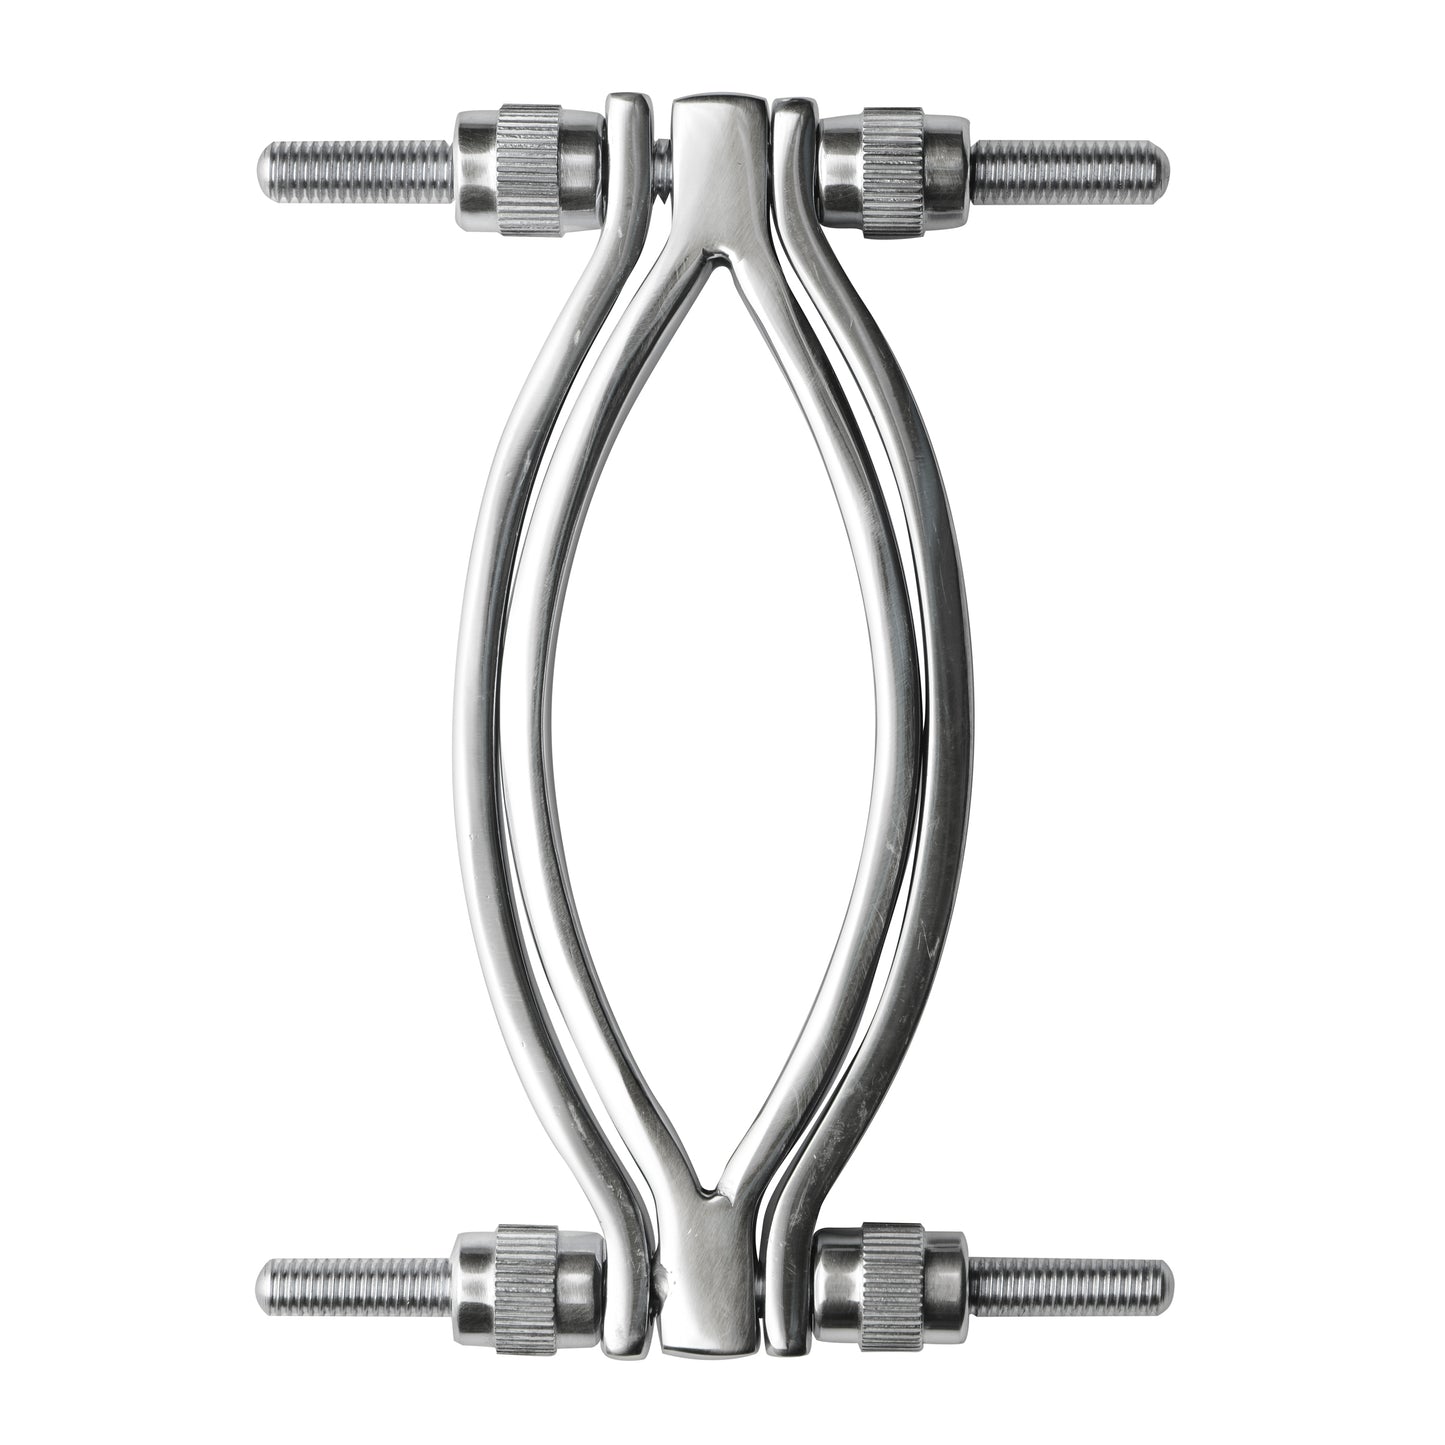 Stainless Steel Adjustable Pussy Clamp - Just for you desires